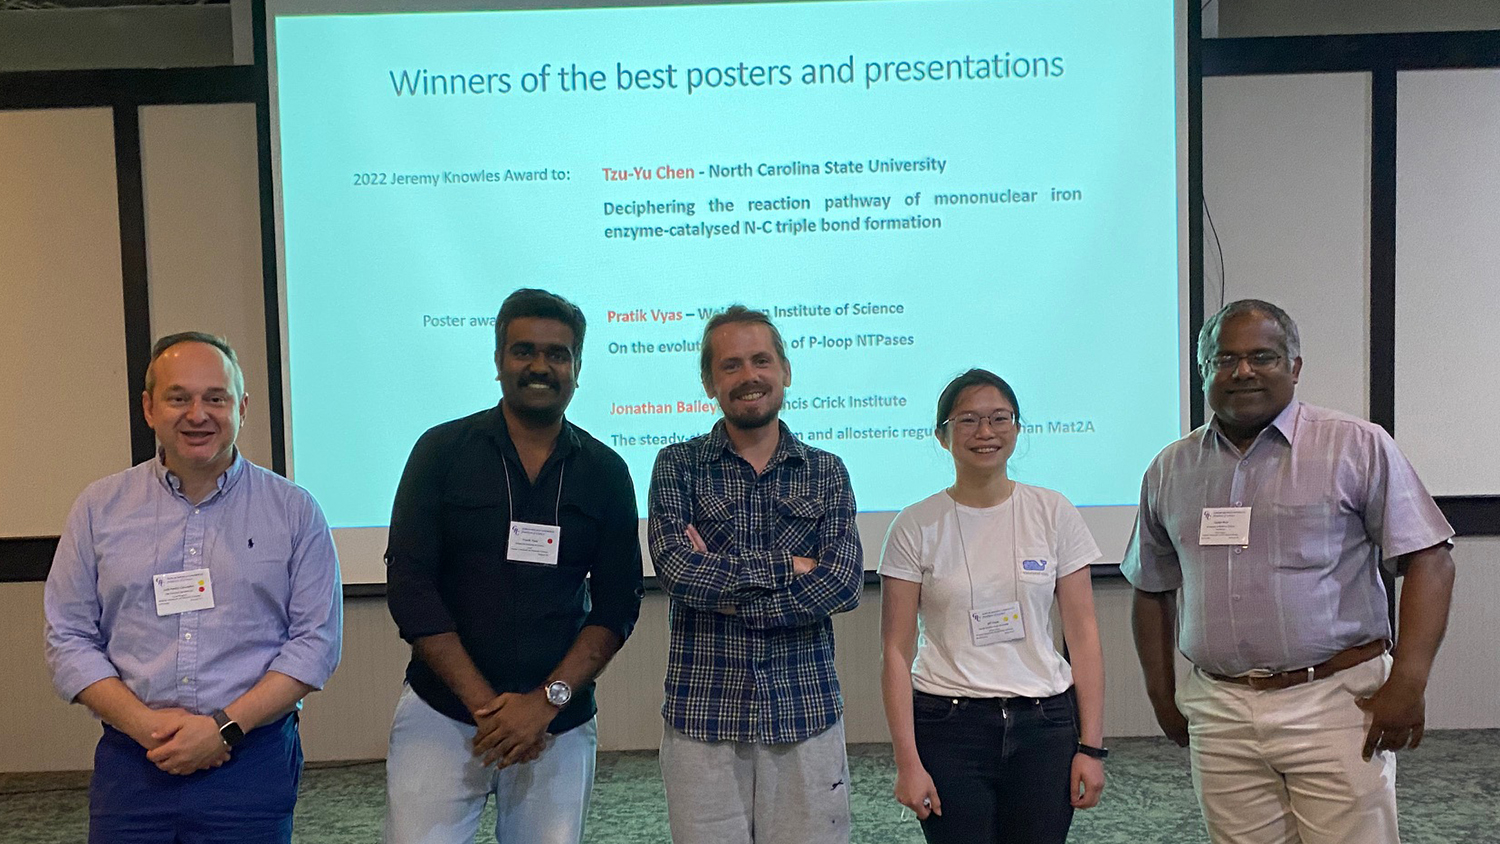 A group of the student winners of awards by the American Chemical Society. The background is a projection of a slide listing the winners' names and presentation titles.